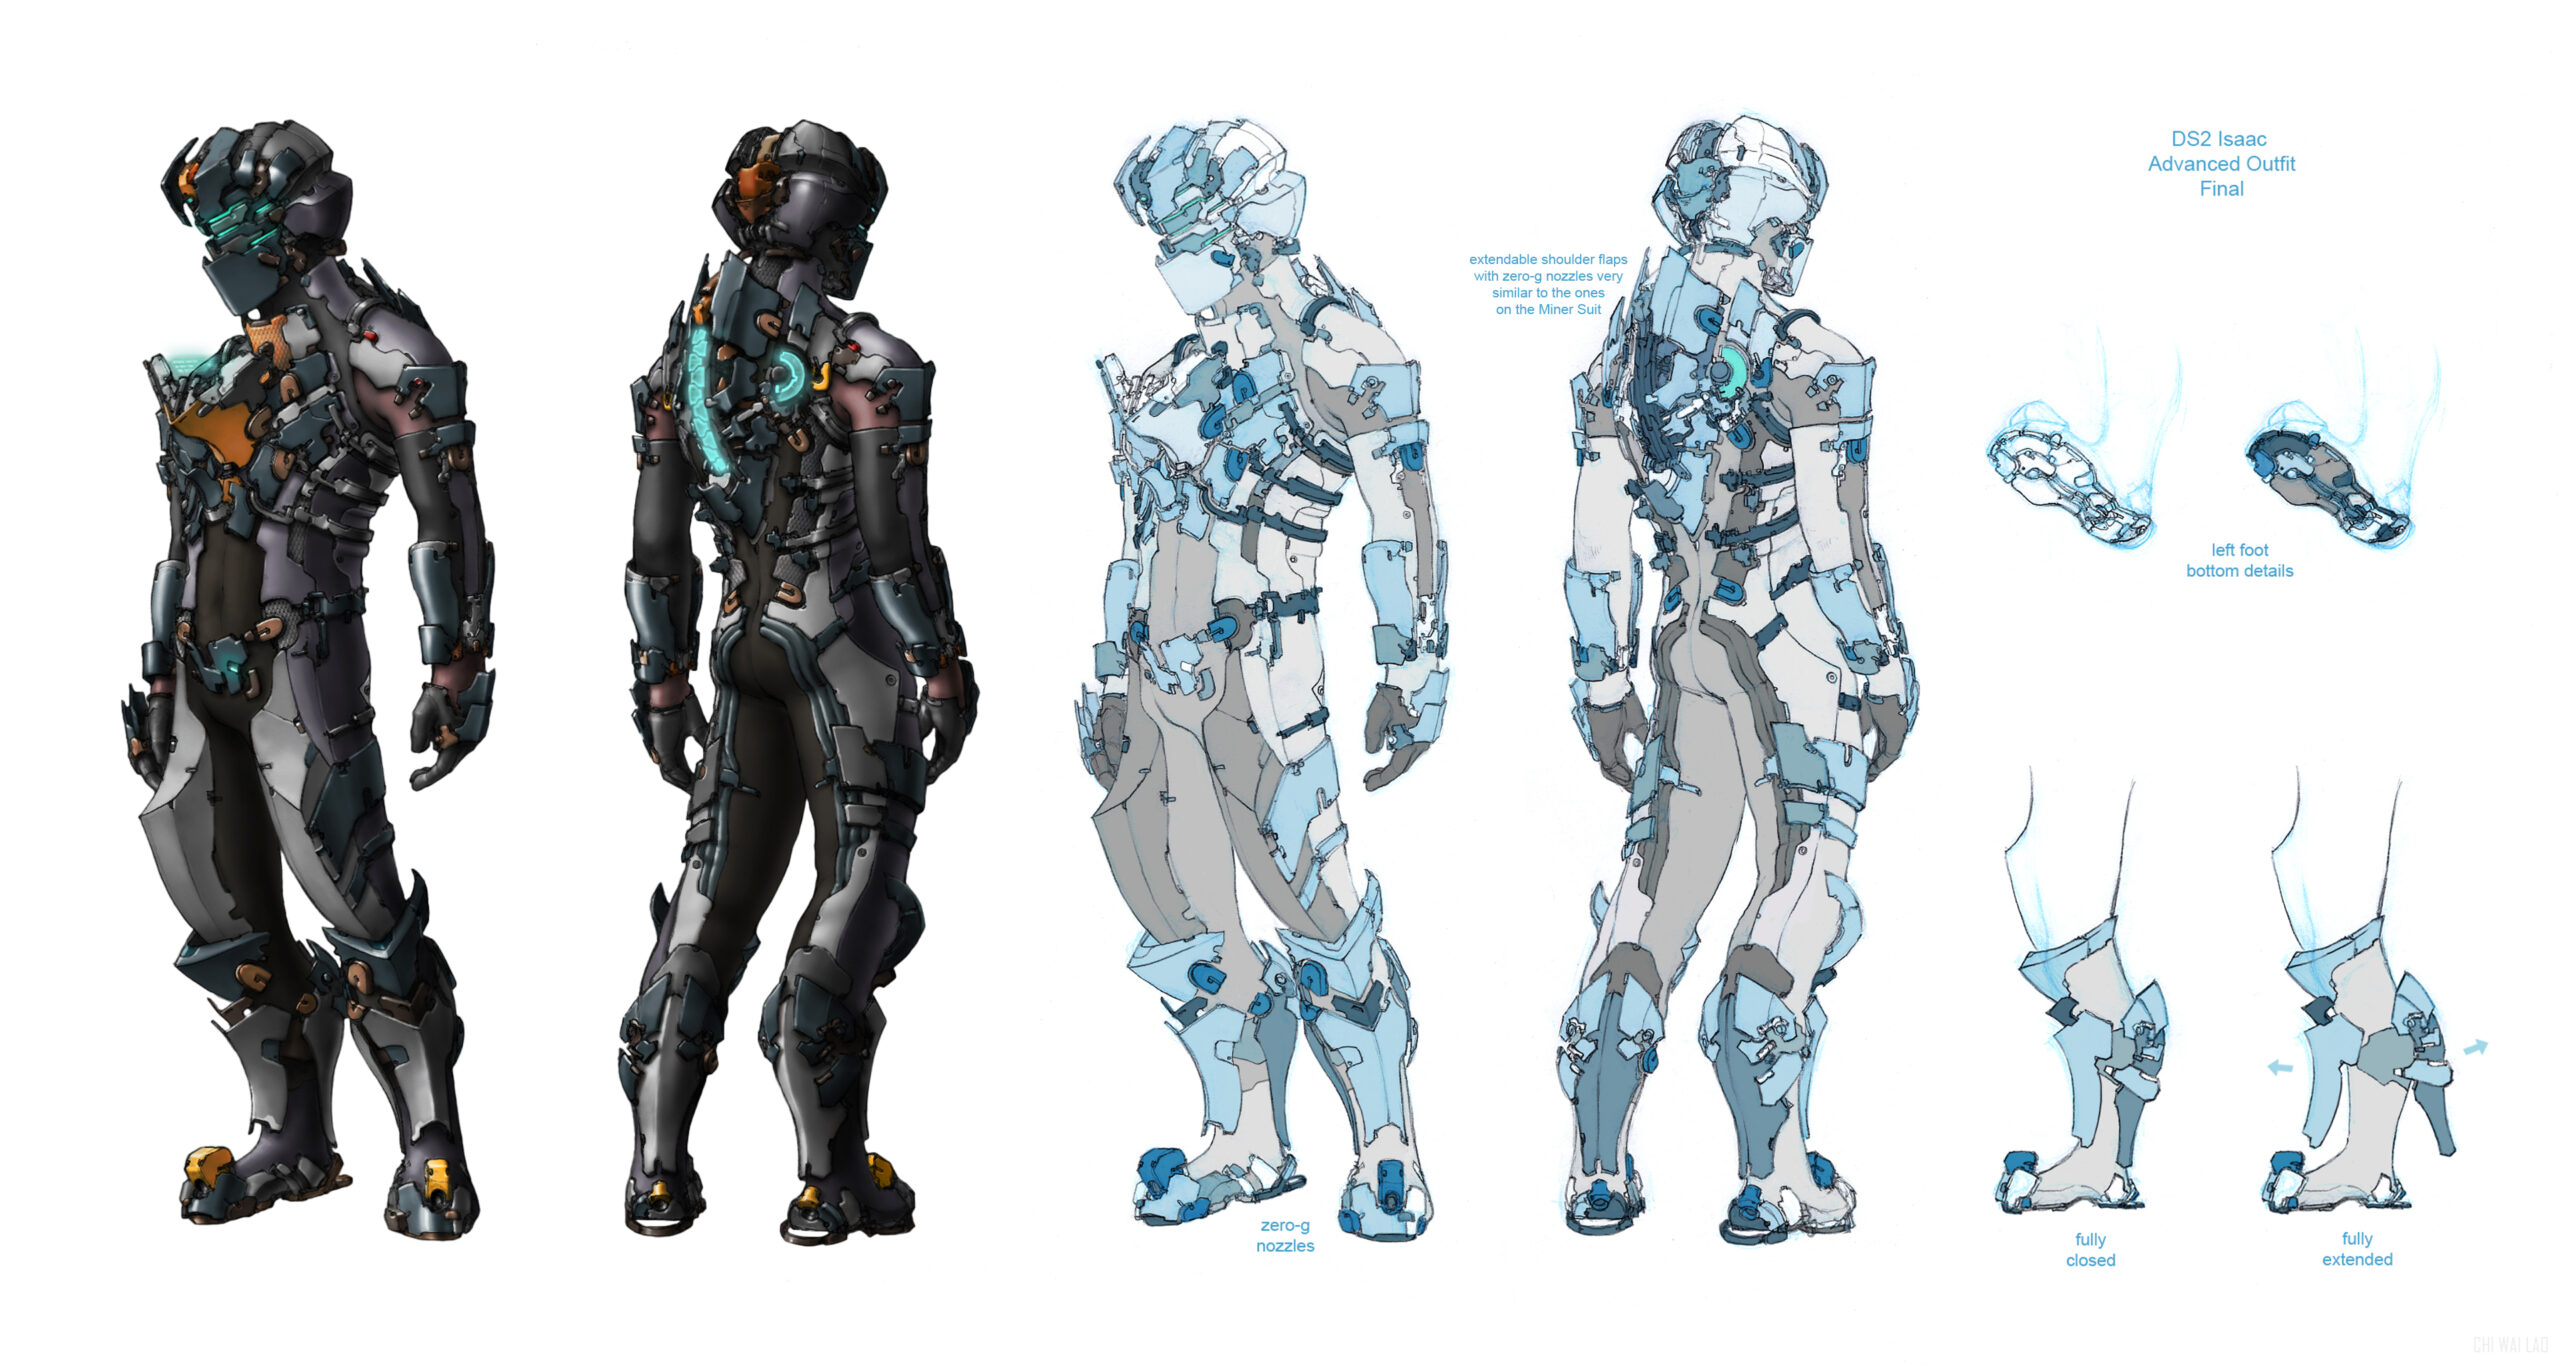 security or advanced suit boss fight dead space 2